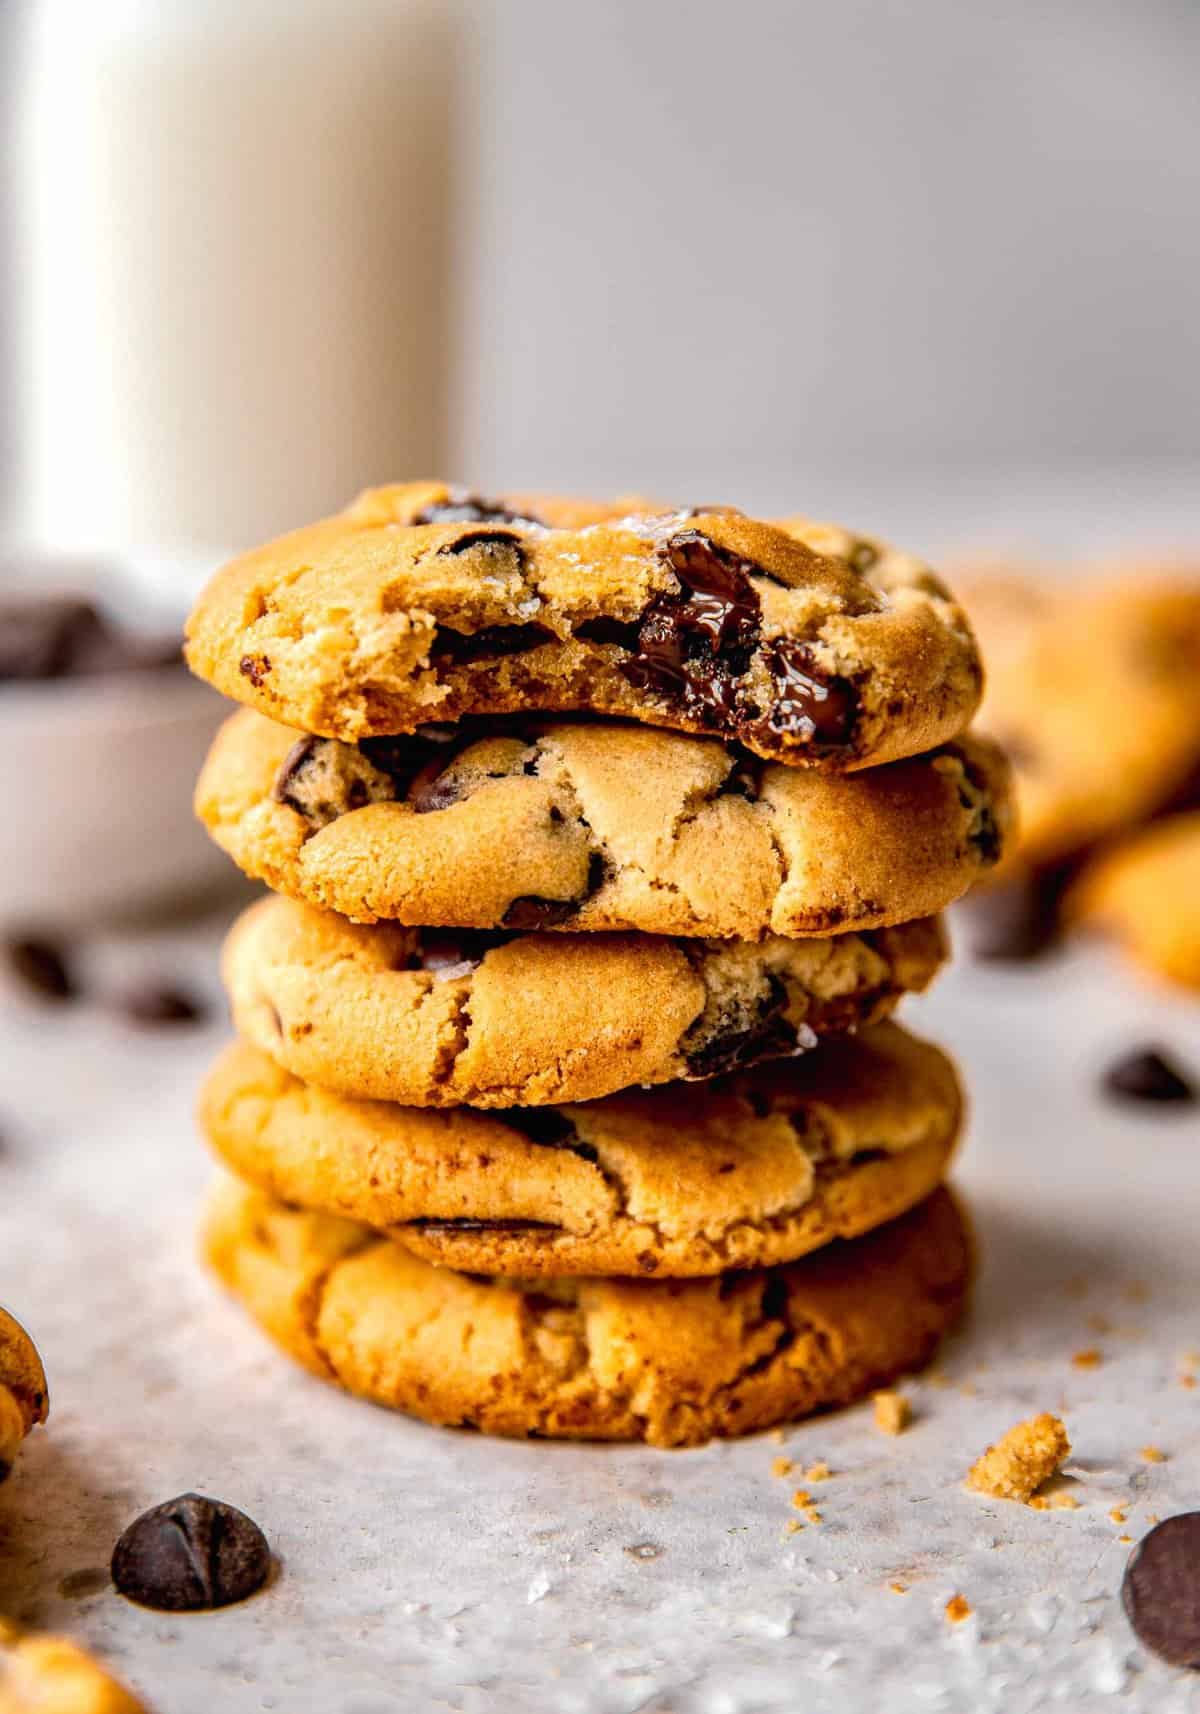 A stack of chocolate chip cookies. The top cookie has a bite taken out of it.